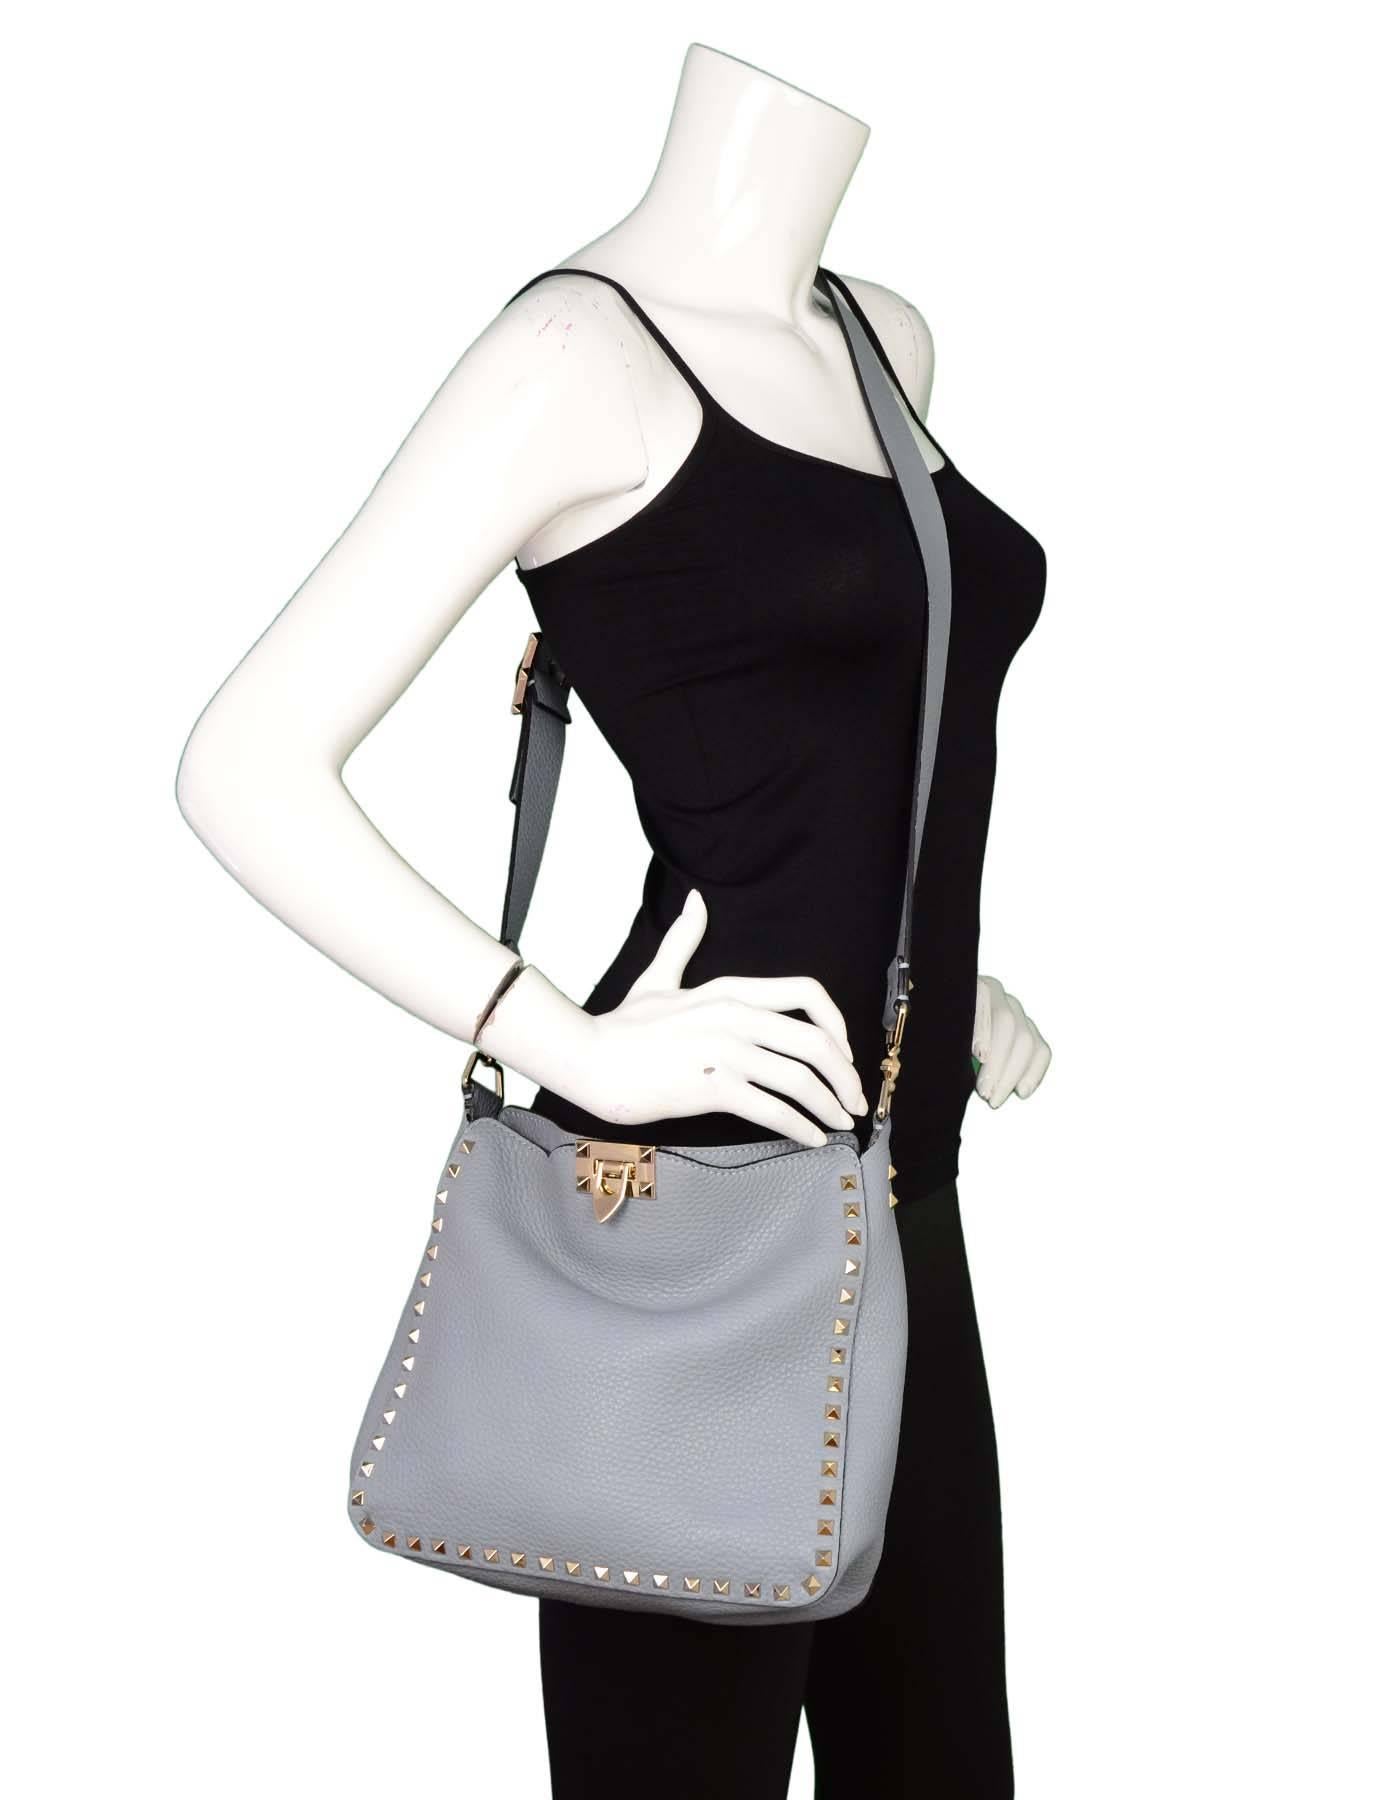 Valentino Slate Blue Rockstud Crossbody Bag
Features adjustable shoulder strap

Made In: Italy
Color: Slate blue/grey
Hardware: Goldtone
Materials: Leather and metal
Lining: None
Closure/Opening: Open top with center flap lock